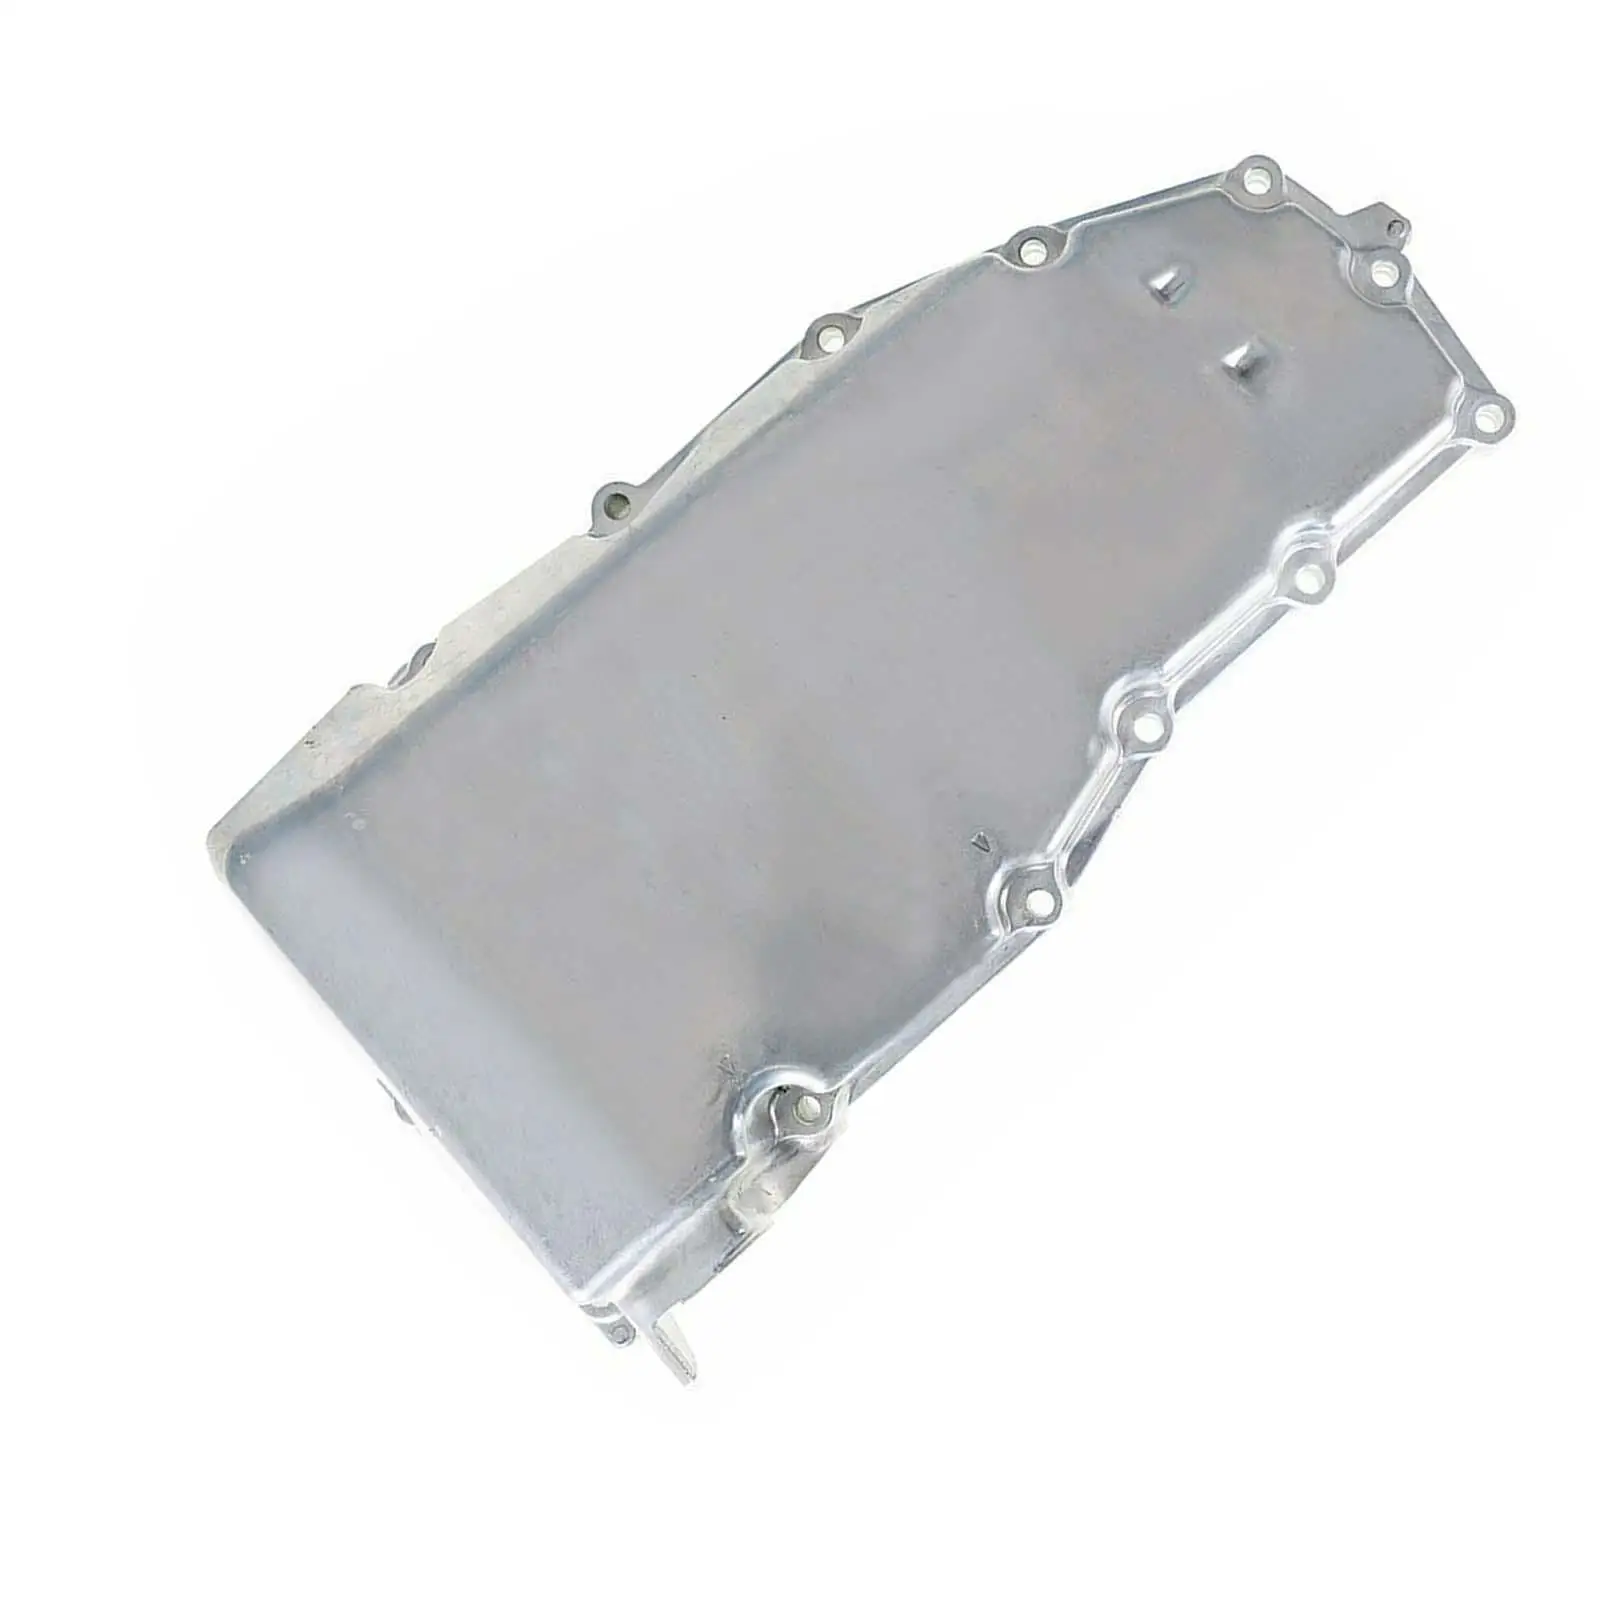 Transmission Oil Pan 211515lj000 Car Accessories High Quality High Performance Directly Replace for Honda Accord Cr-v Civic